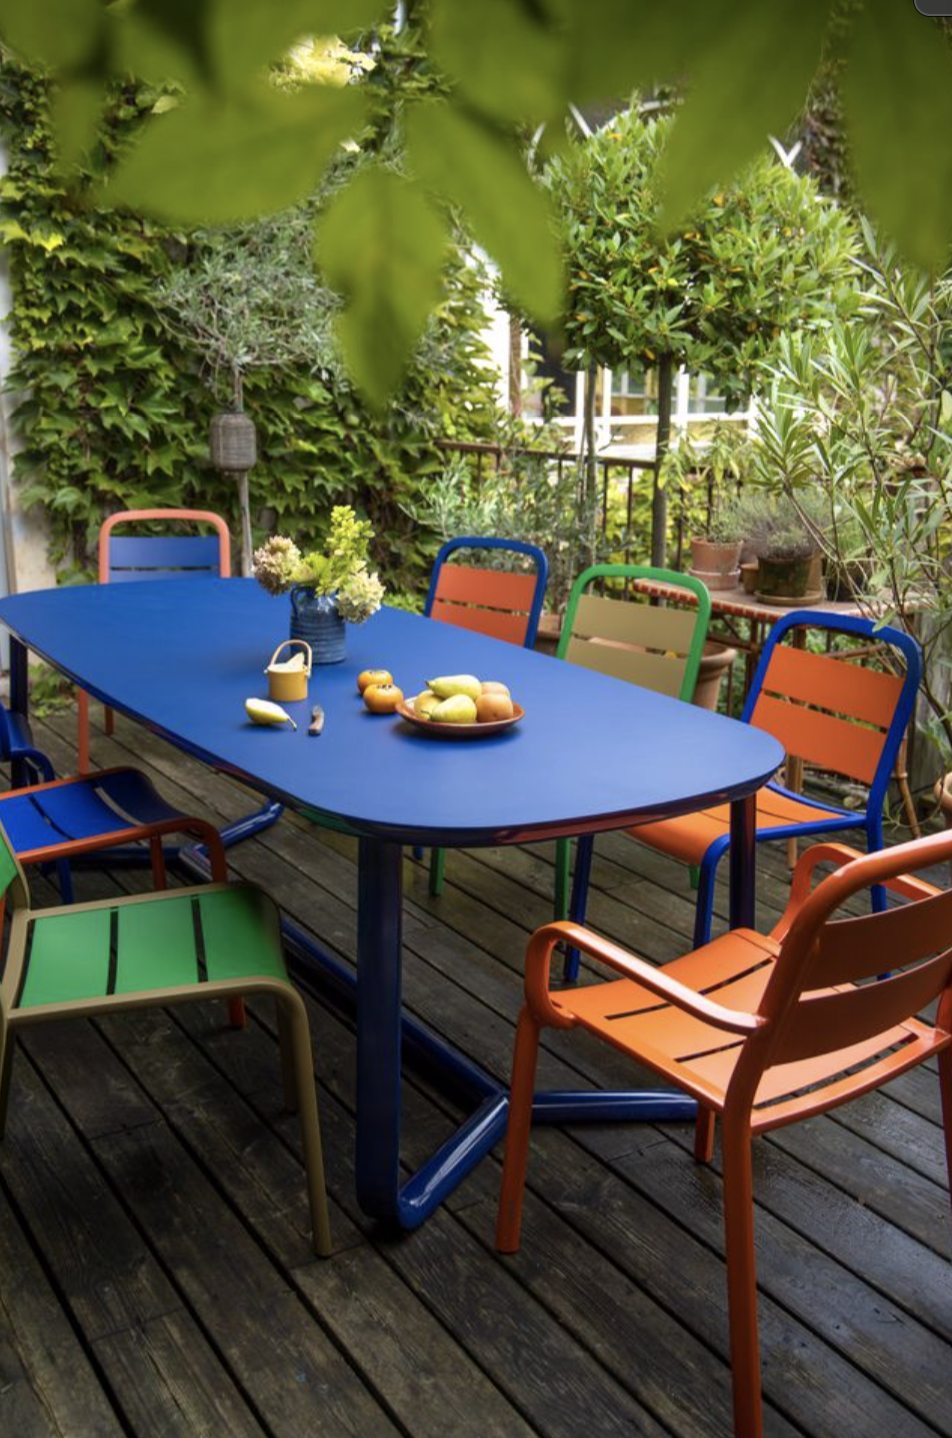 Upgrade Your Outdoor Dining Experience with a Stylish Patio Table